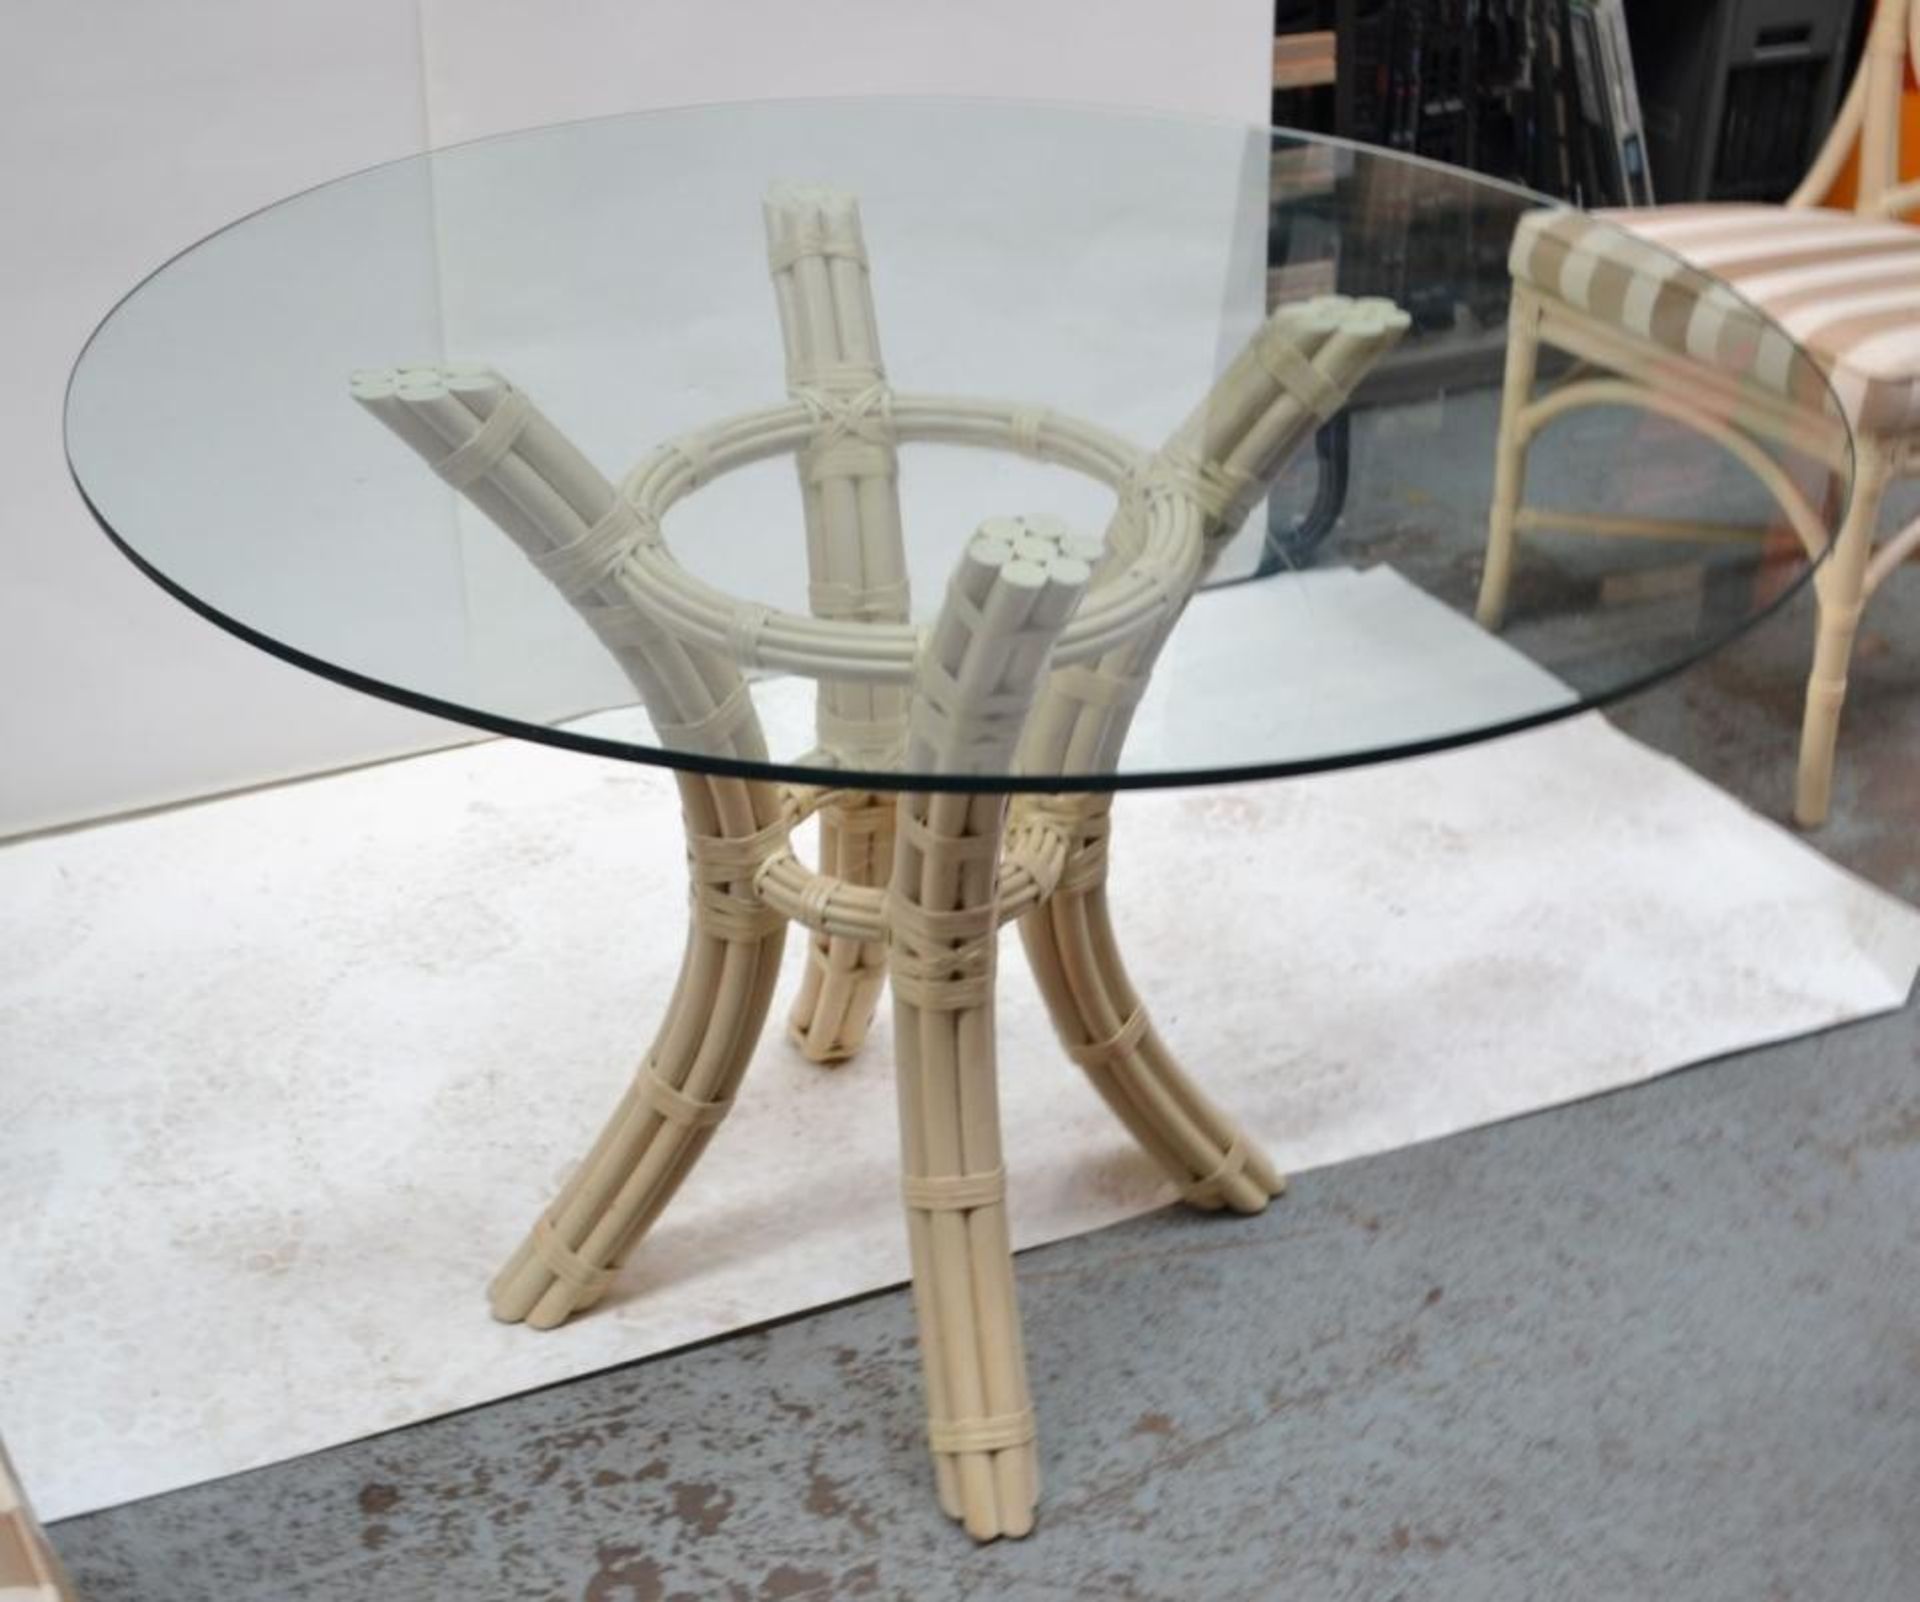 1 x Glass Topped Cane Table with 4 Chairs - Pre-owned In Good Condition - AE010 - CL007 - - Image 7 of 13